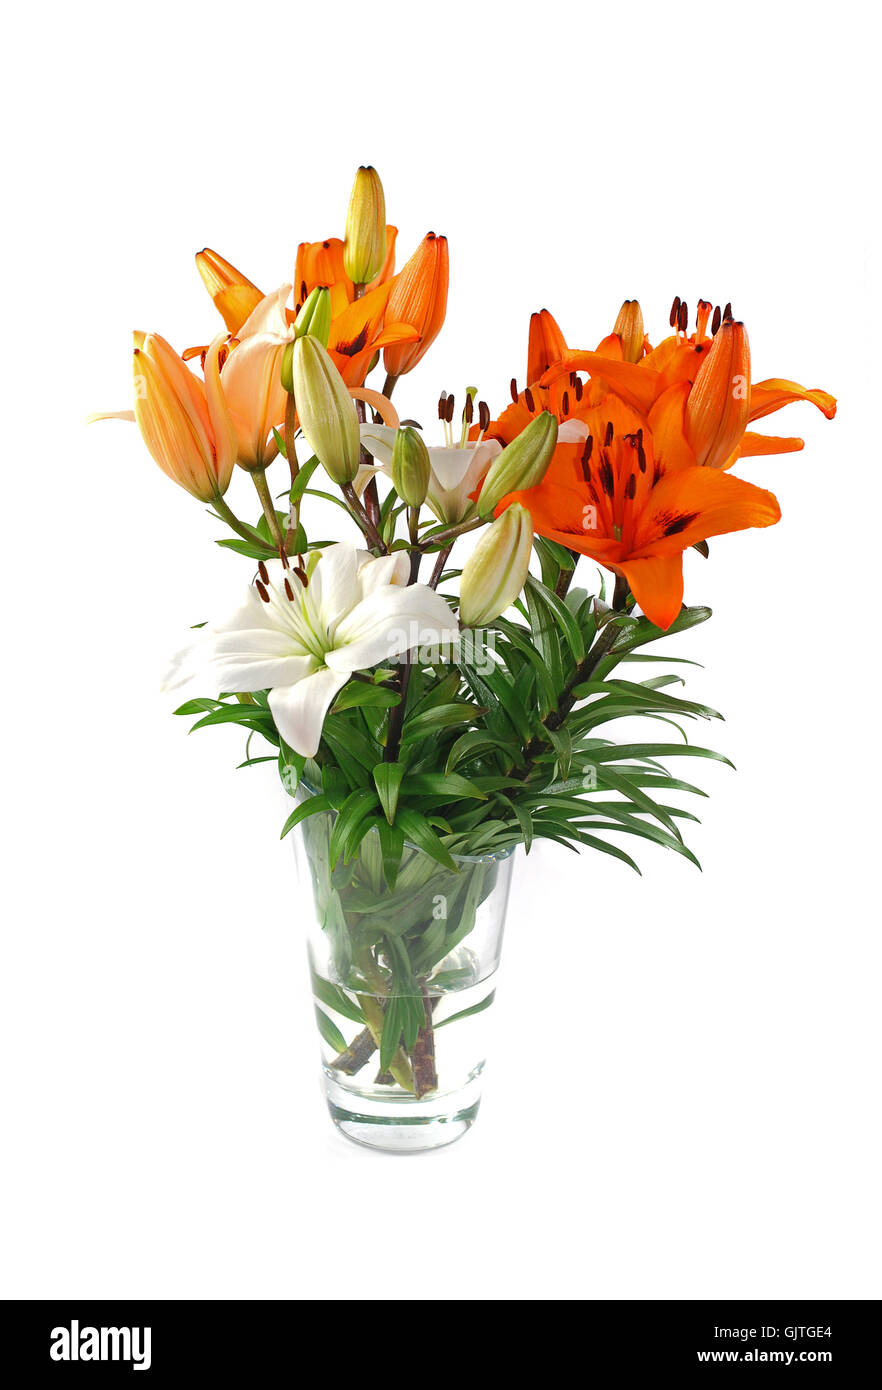 vase with lilies Stock Photo